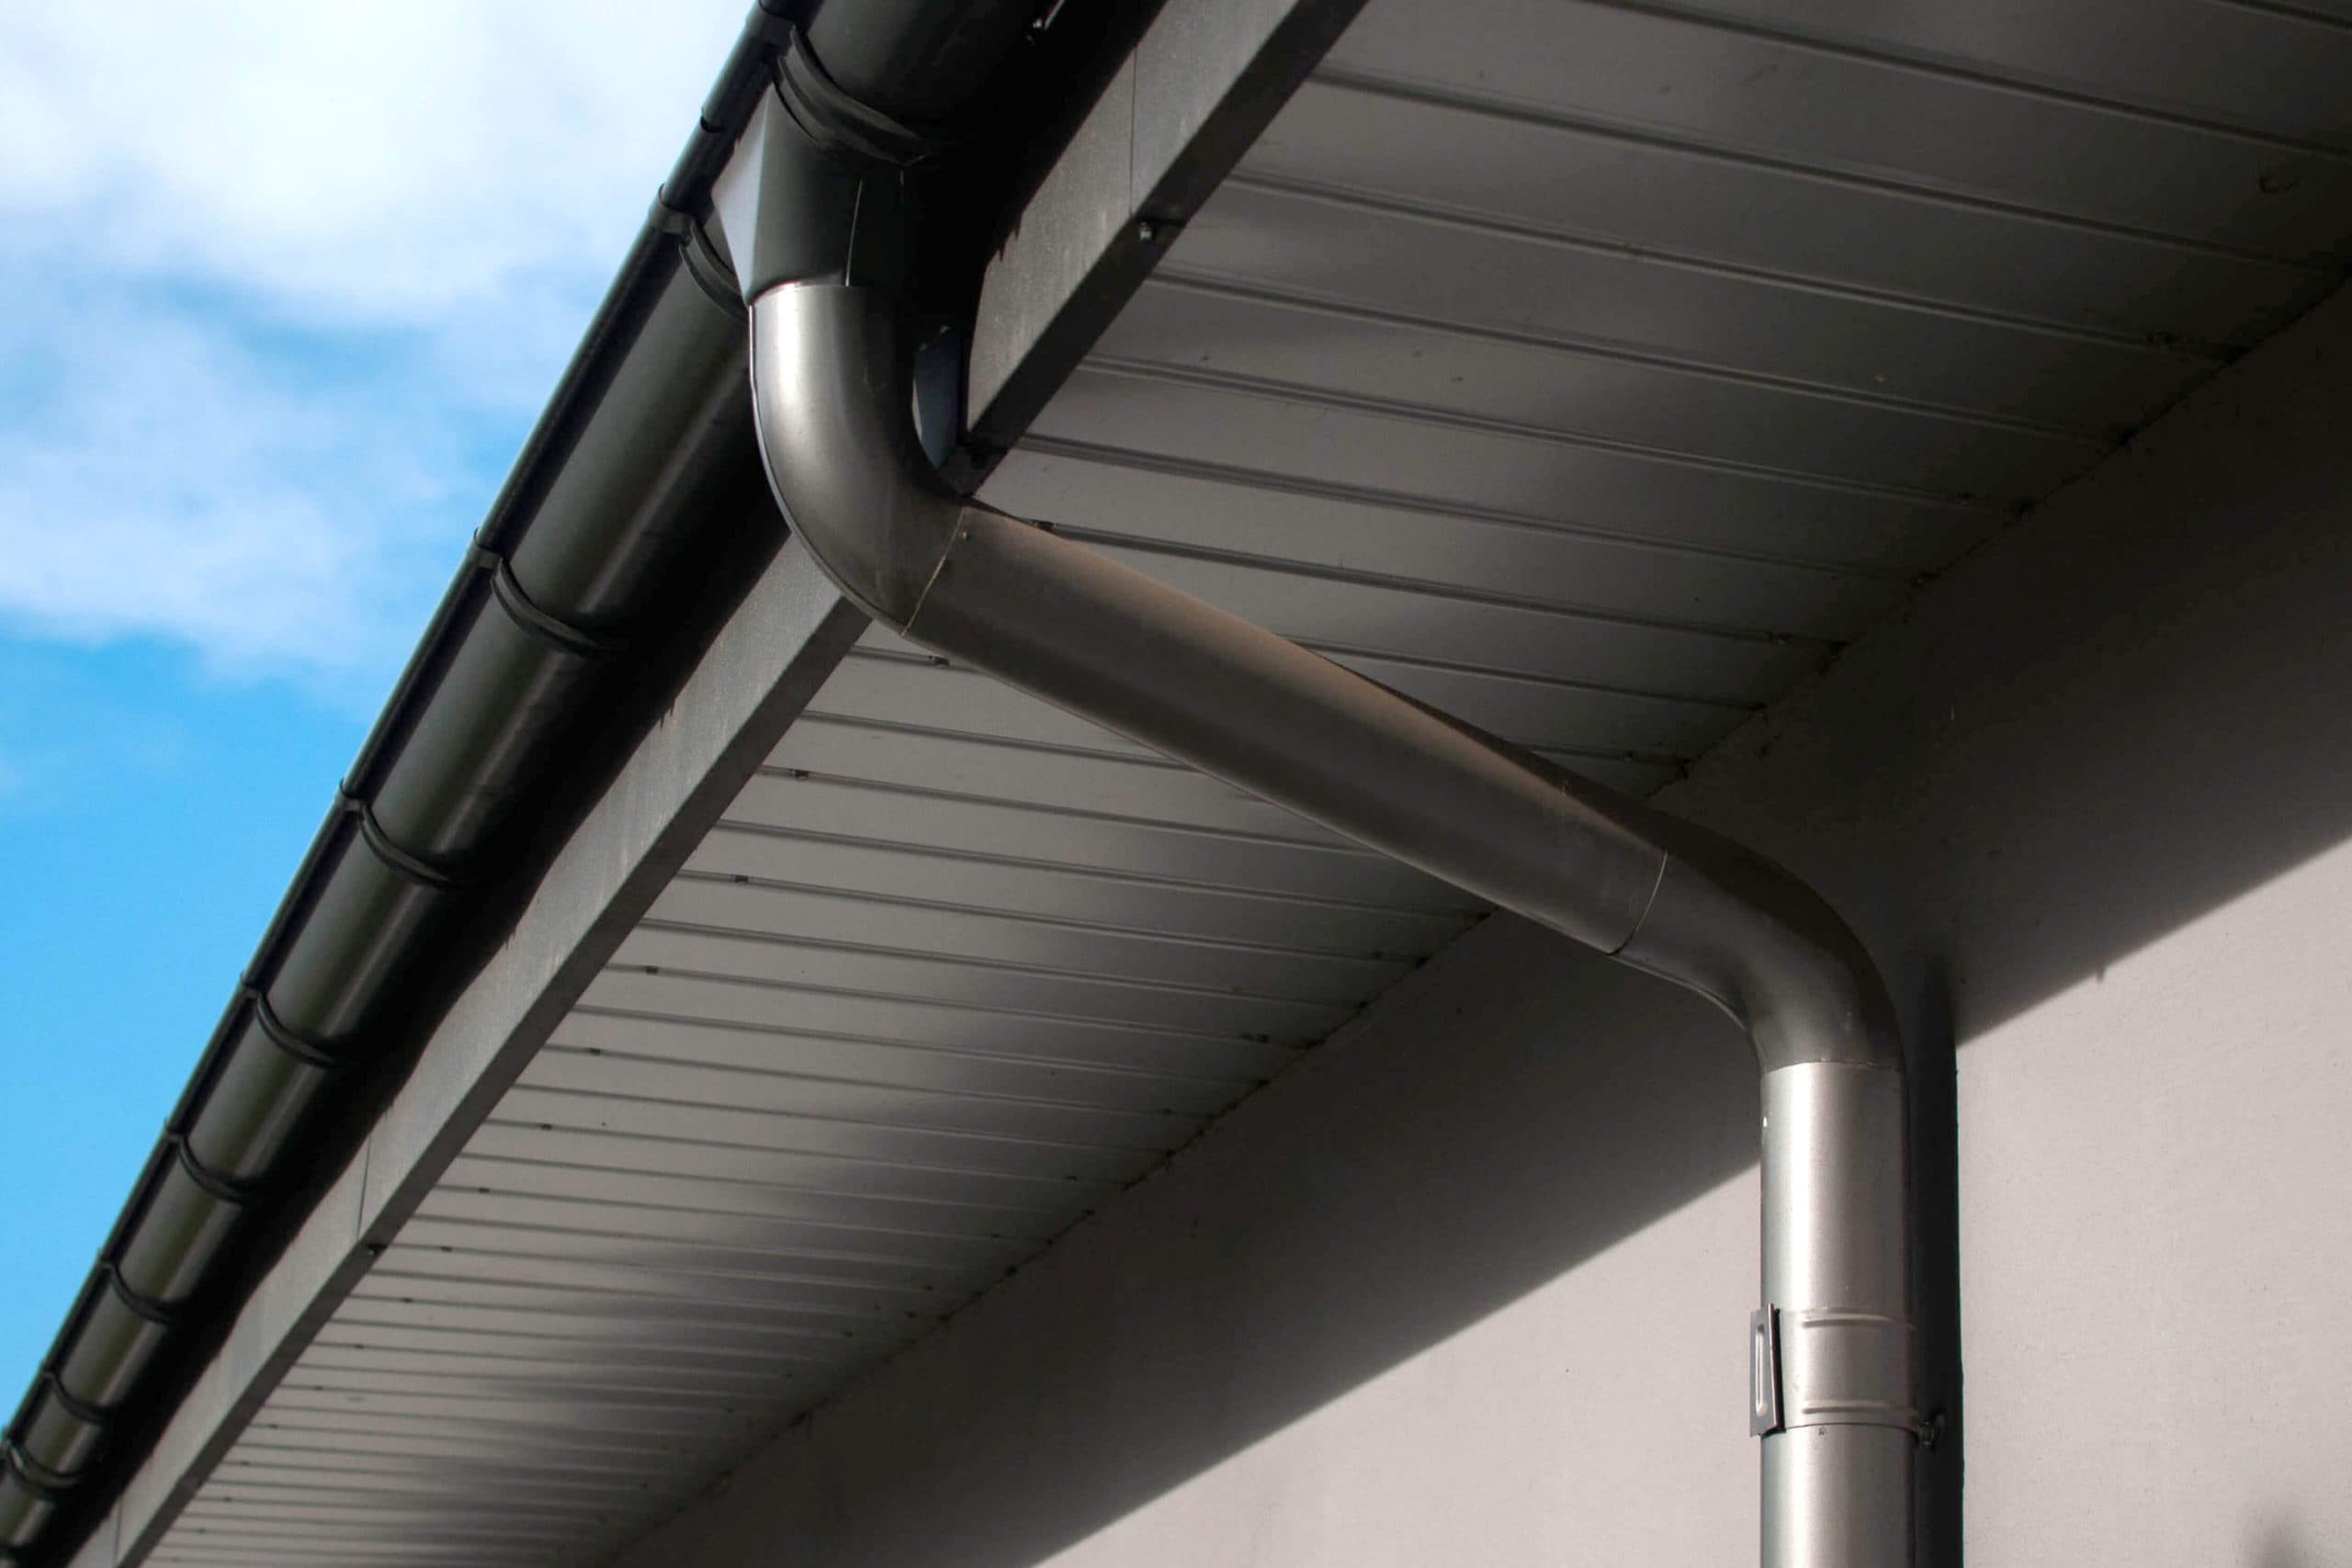 Corrosion-resistant galvanized gutters installed on a commercial building in Myrtle Beach